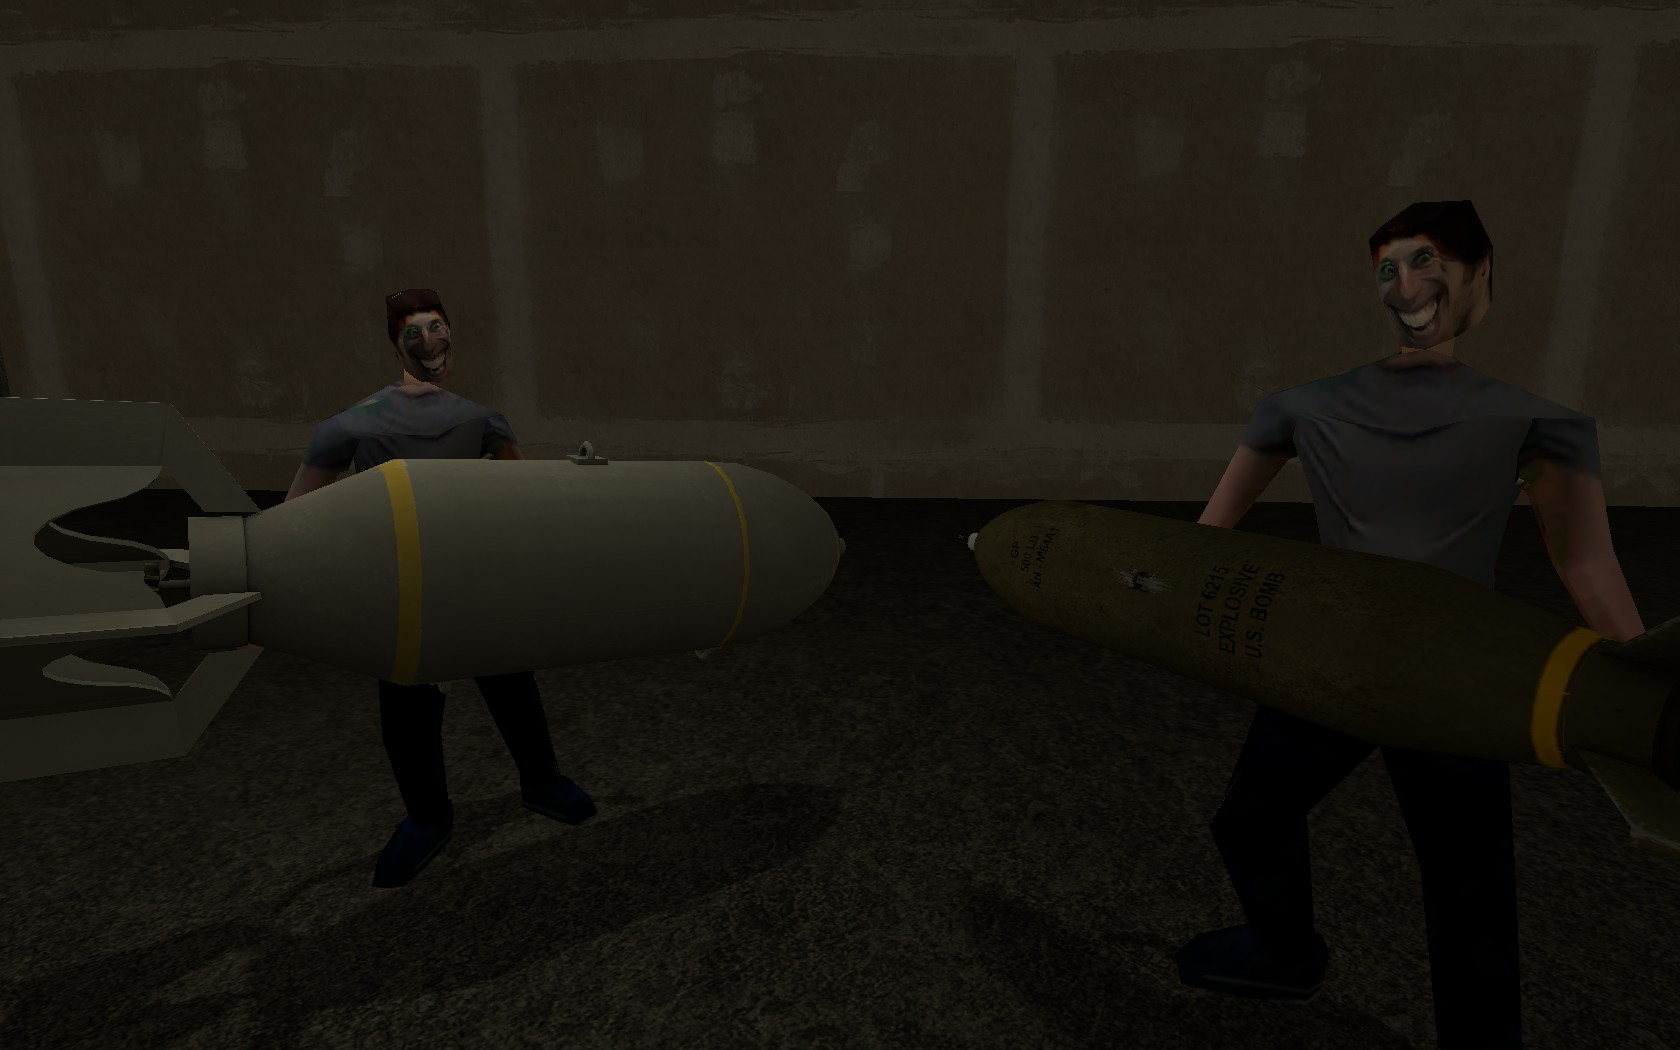 High Quality sus jerma's carrying warheads Blank Meme Template